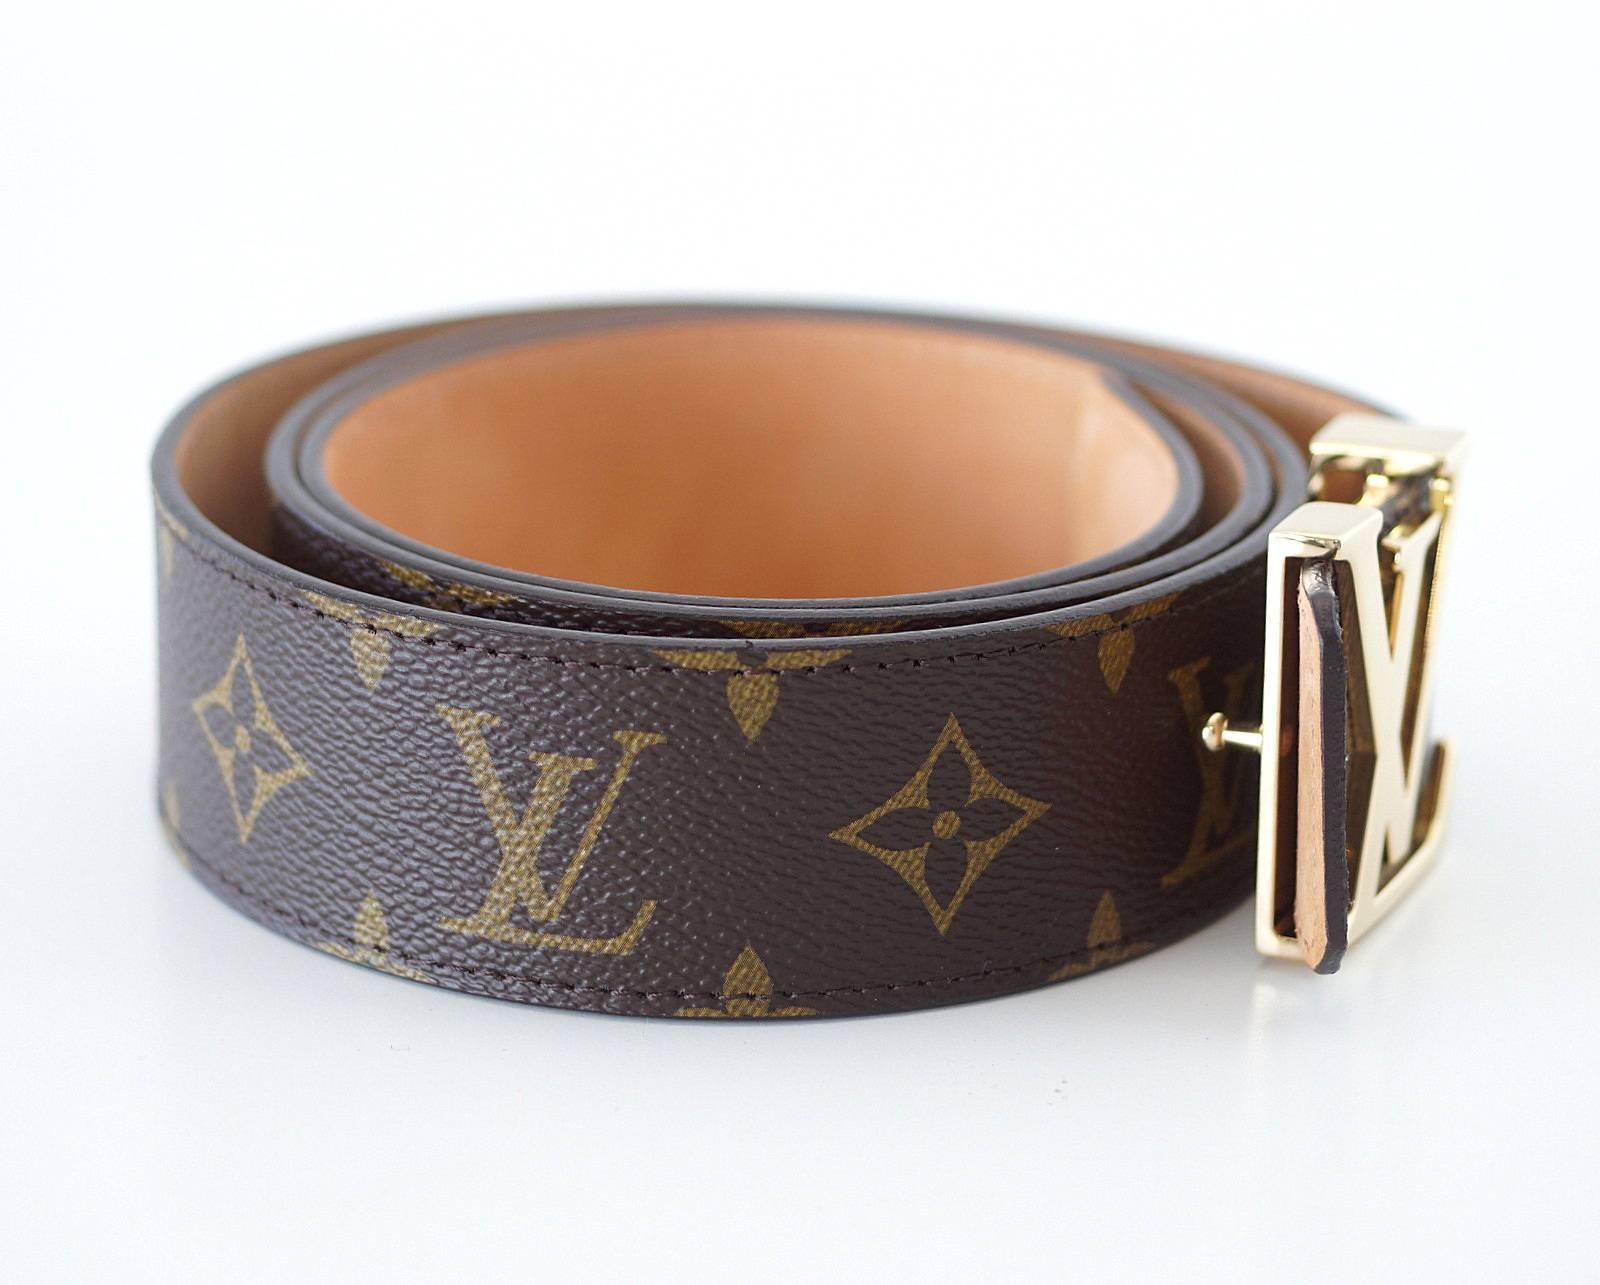 Guaranteed authentic LV San Tulle monogram mens belt can easily be unisex.
Gold LV buckle.  
LOUIS VUITTON PARIS is stamped on the belt.
NEW or NEVER WORN
final sale

SIZE:  100cm / 40

BELT MEASURES:
LENGTH:  46"
WIDTH: 